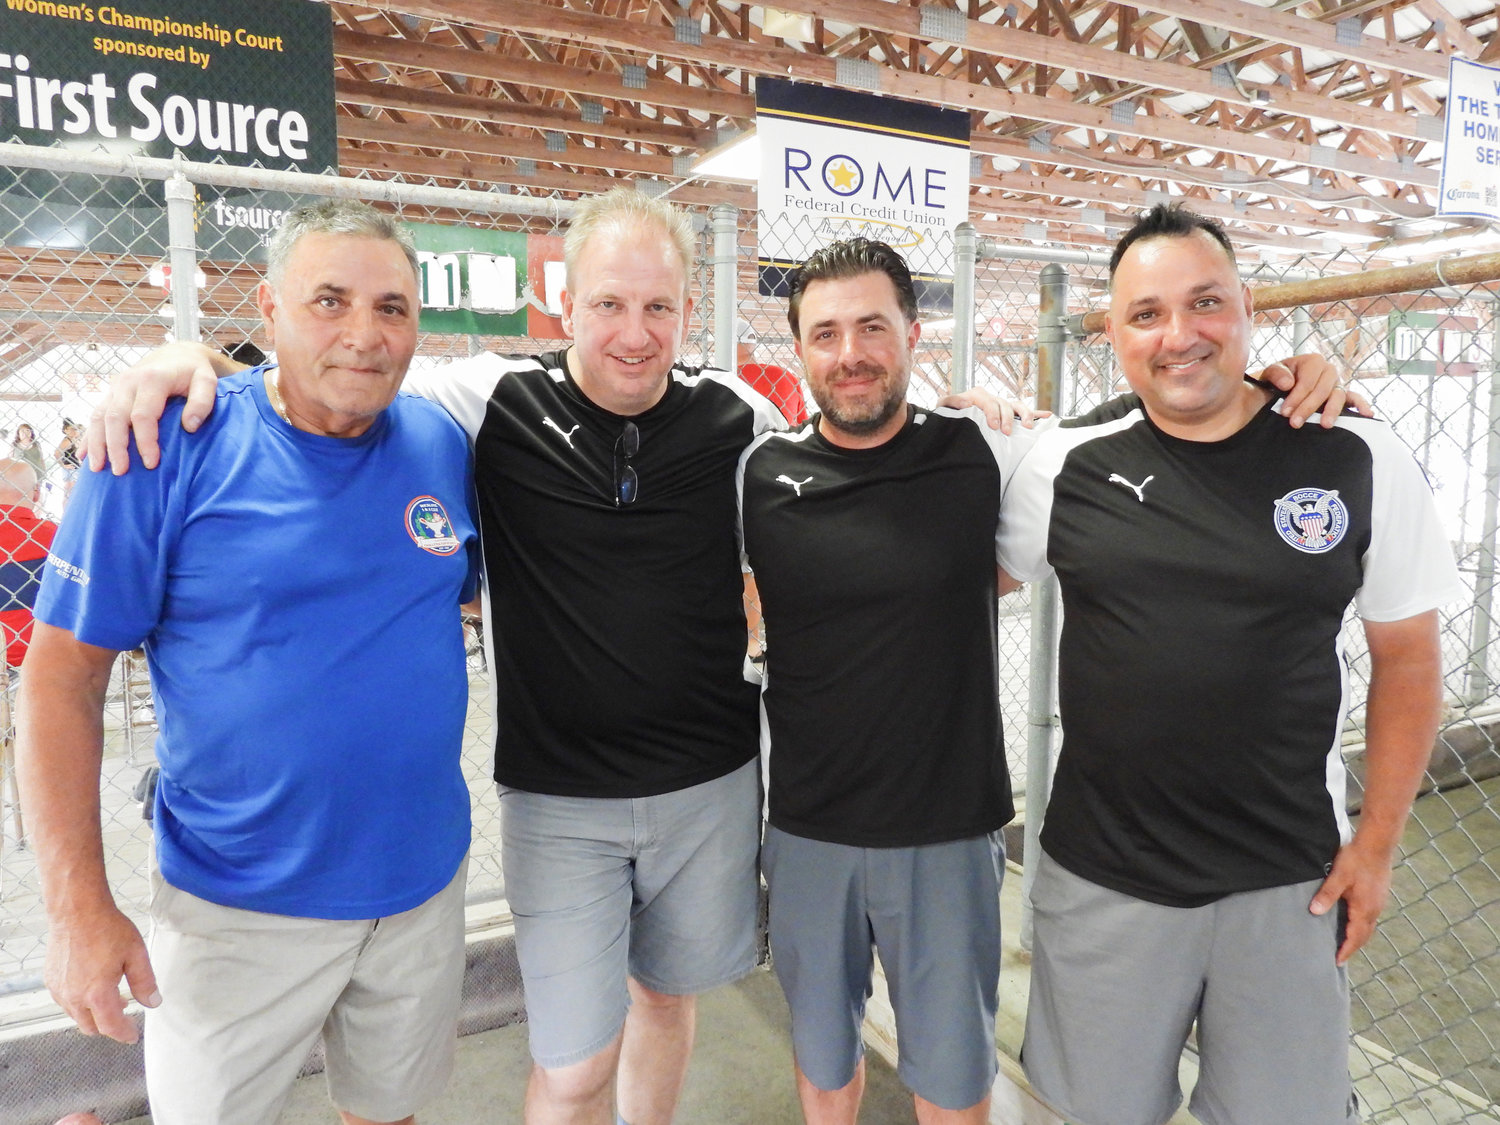 Club Vitu Lazio No. 21 , comprised of, from left, Felice Scala, Marco Cignarale, Pete Russo and Natale Scala won the open division of the 47th World Series of Bocce Sunday at Toccolana Club in Rome.